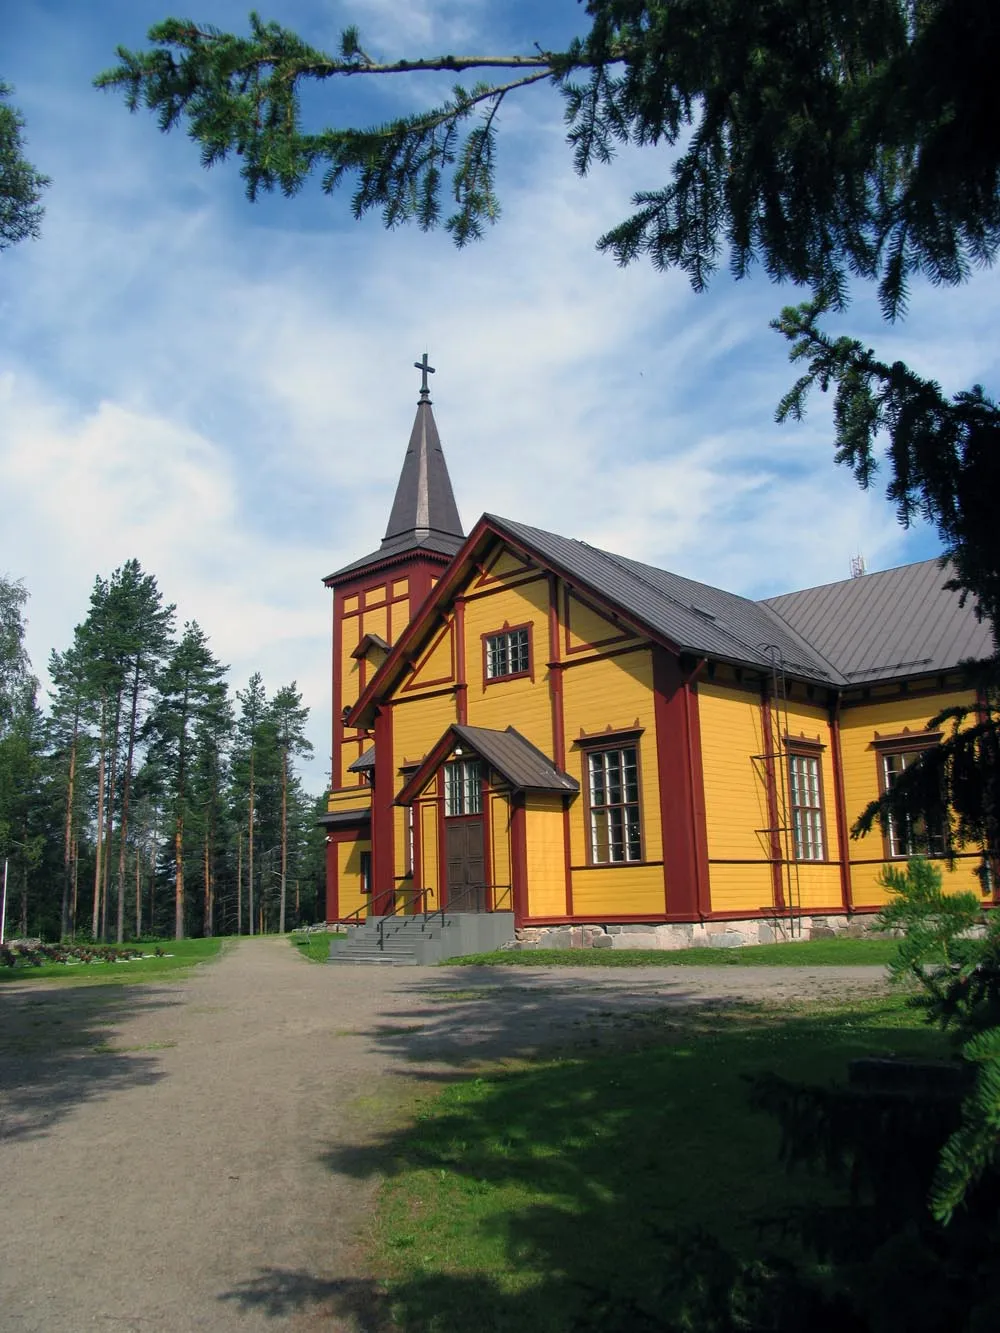 Photo showing: Sievi Church in Sievi, Finland. The church was designed by architect L.I. Lindqvist and it was completed in 1861.